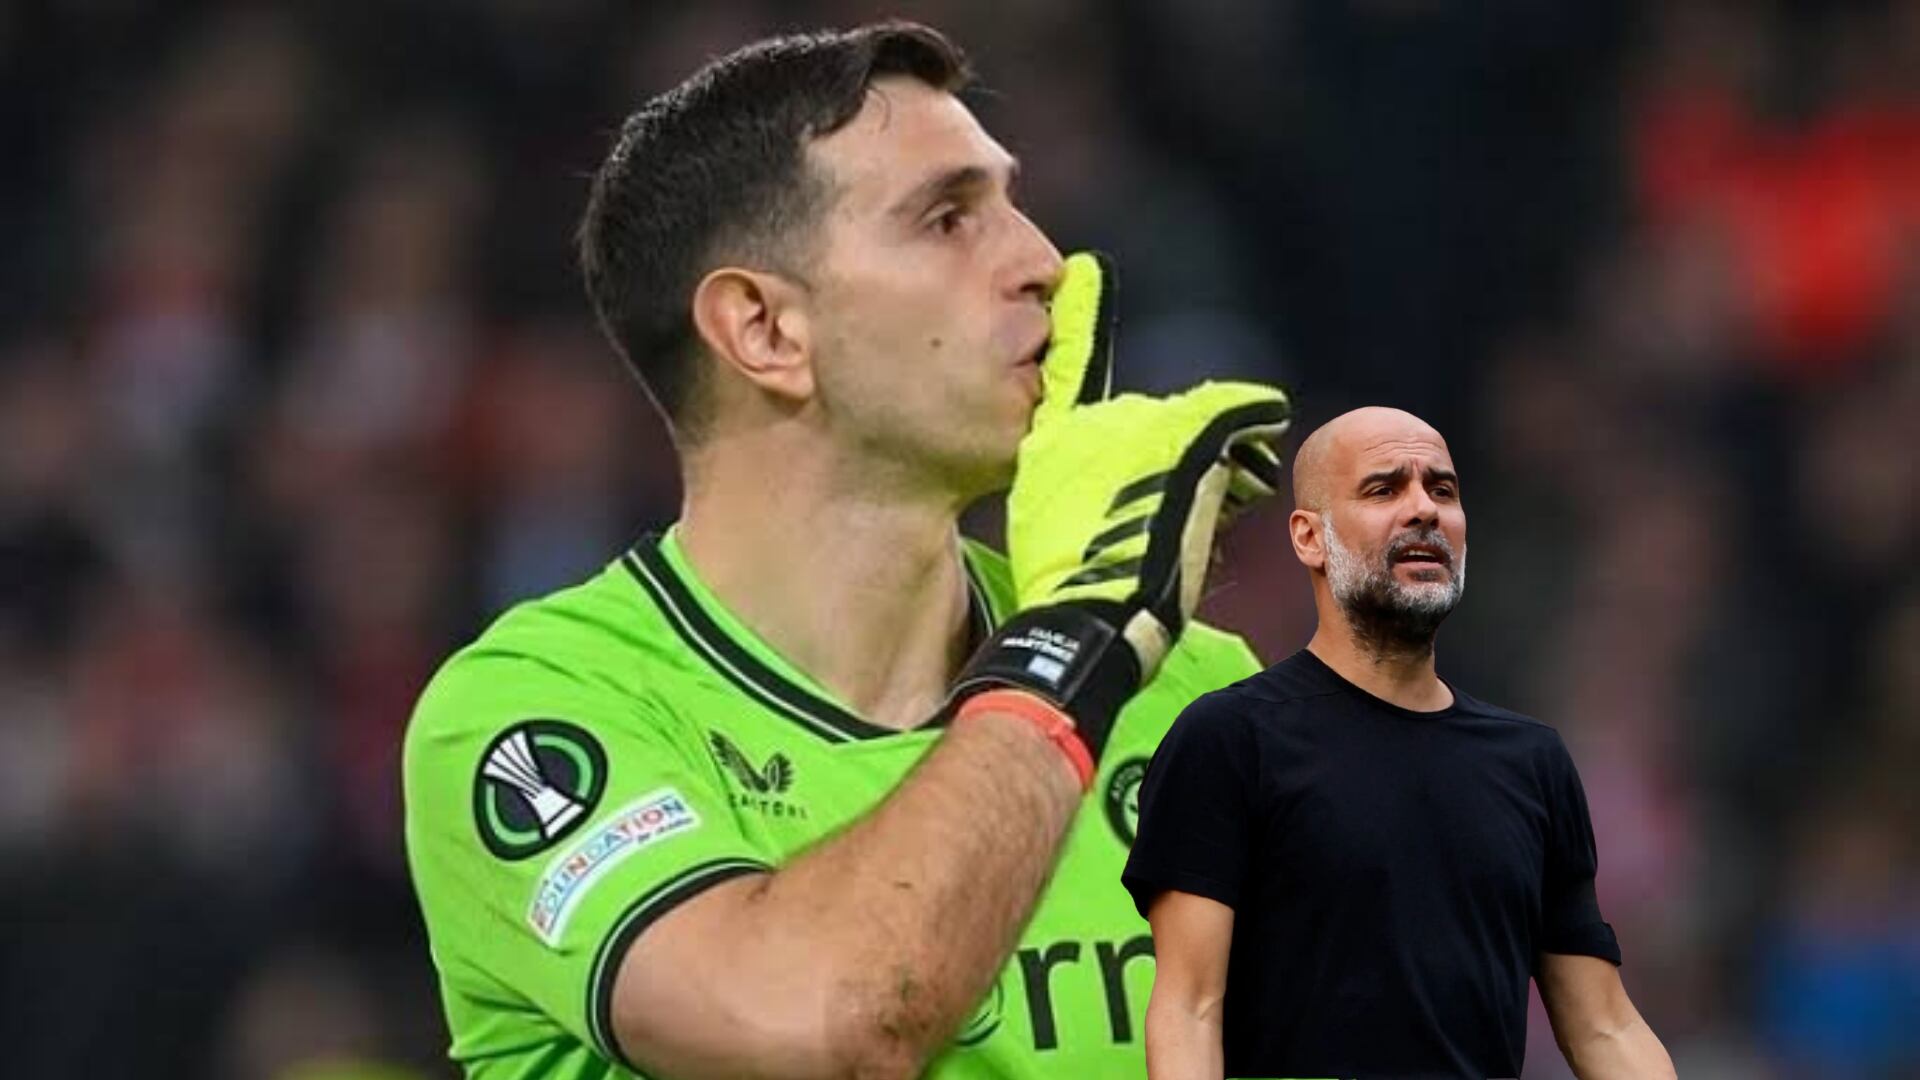 (VIDEO) Dibu Martinez could be an option for Man City, but the terrible mistake vs Liverpool that Guardiola won't like